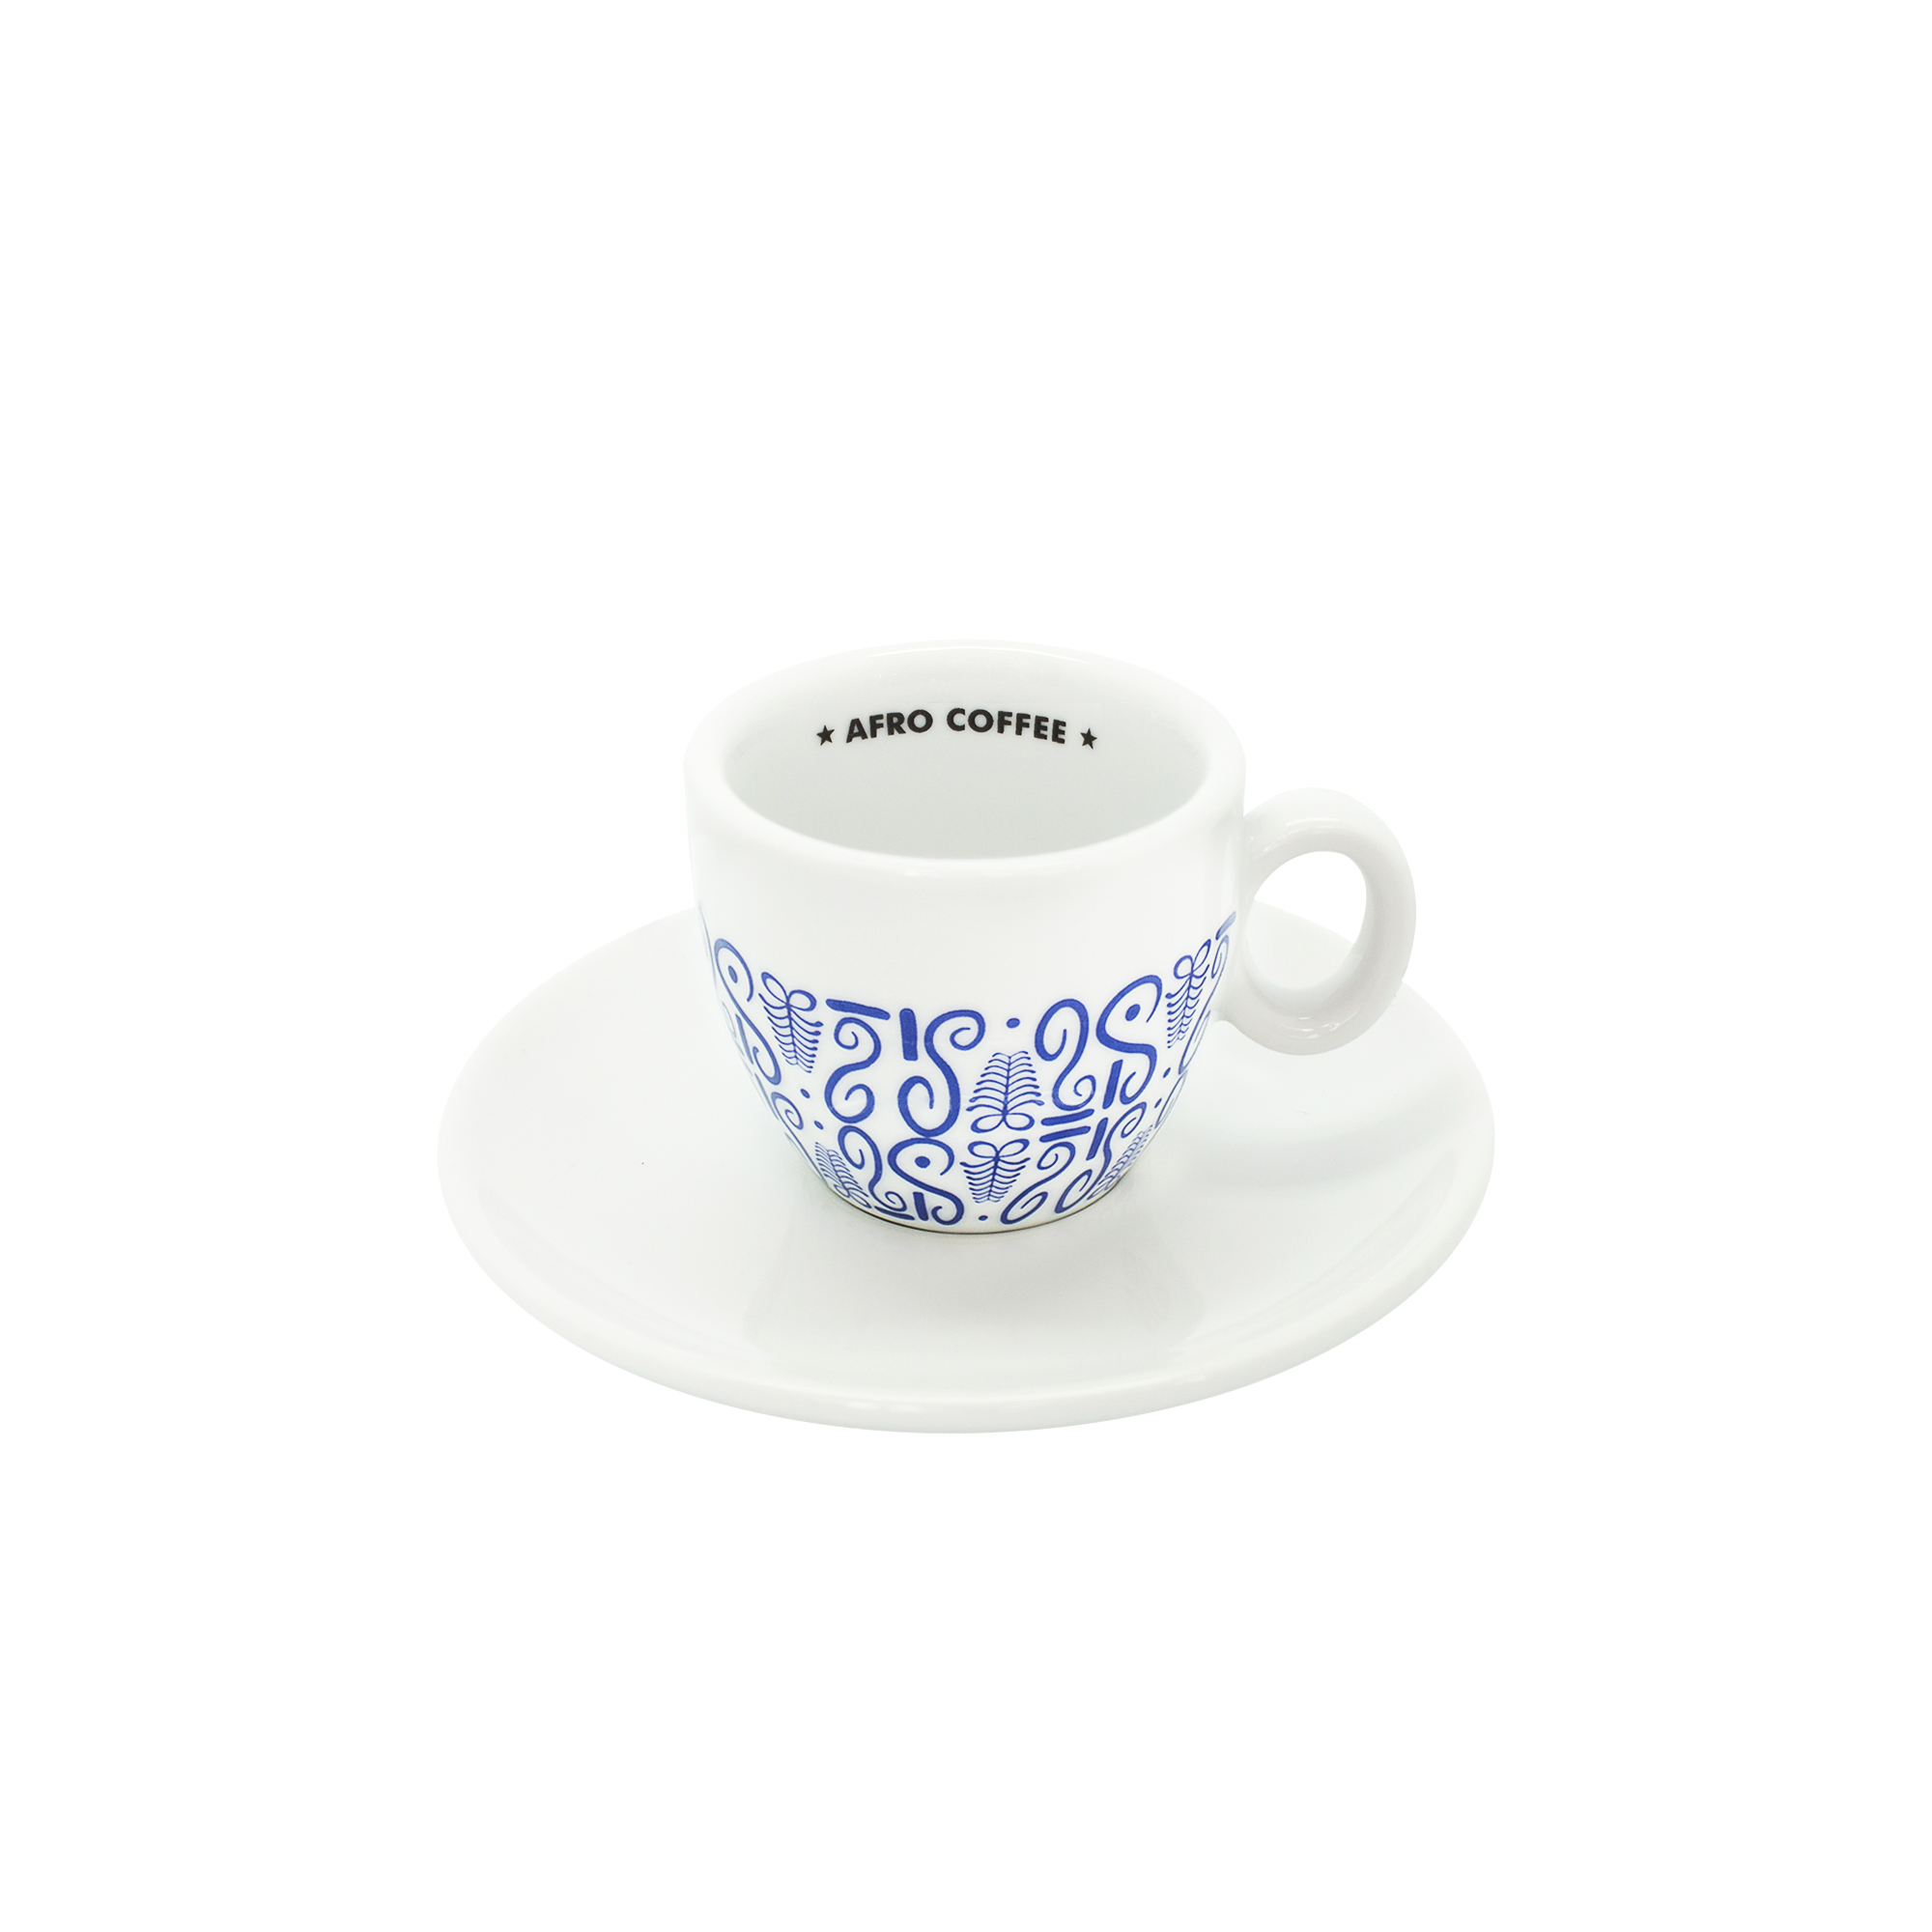 AFRO COFFEE Espresso Cup 2nd edition